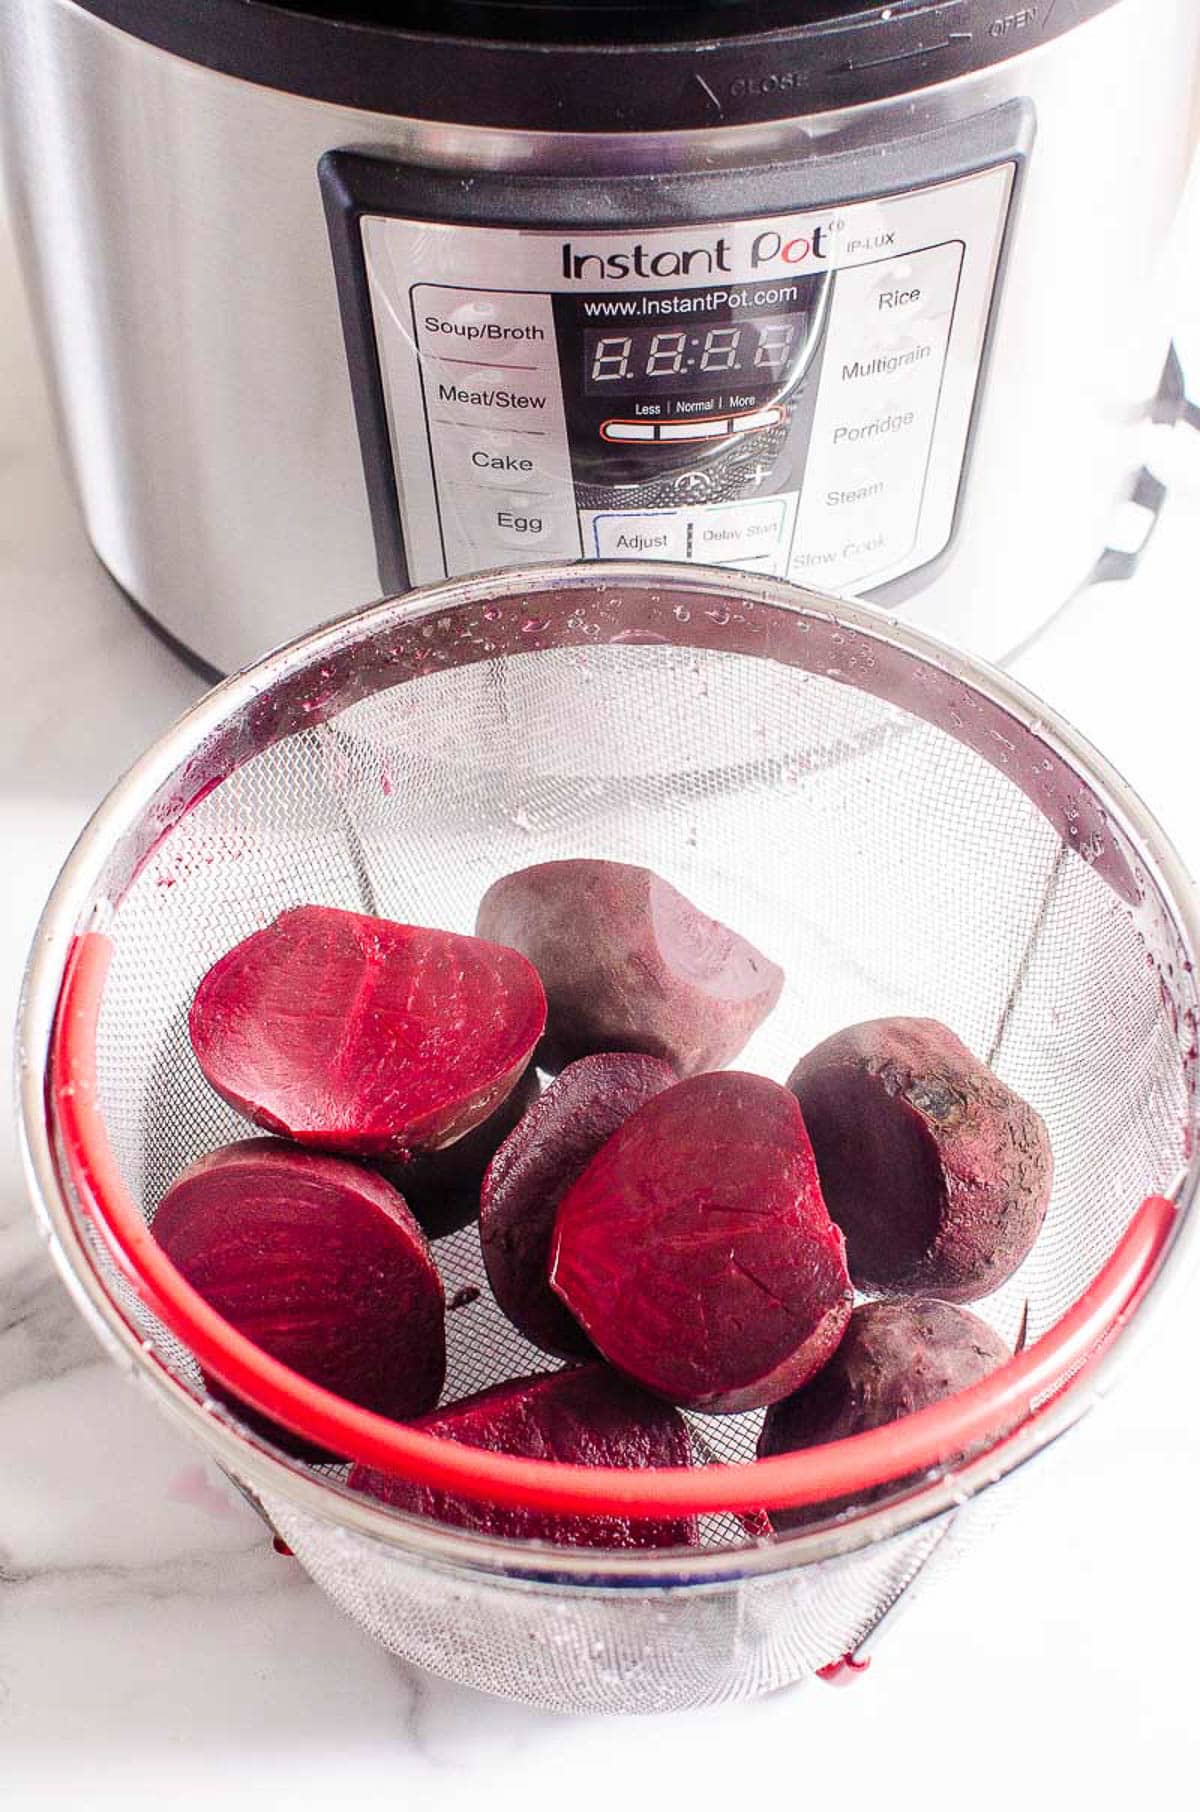 Sliced cooked beets in a steamer basket next to instant pot.